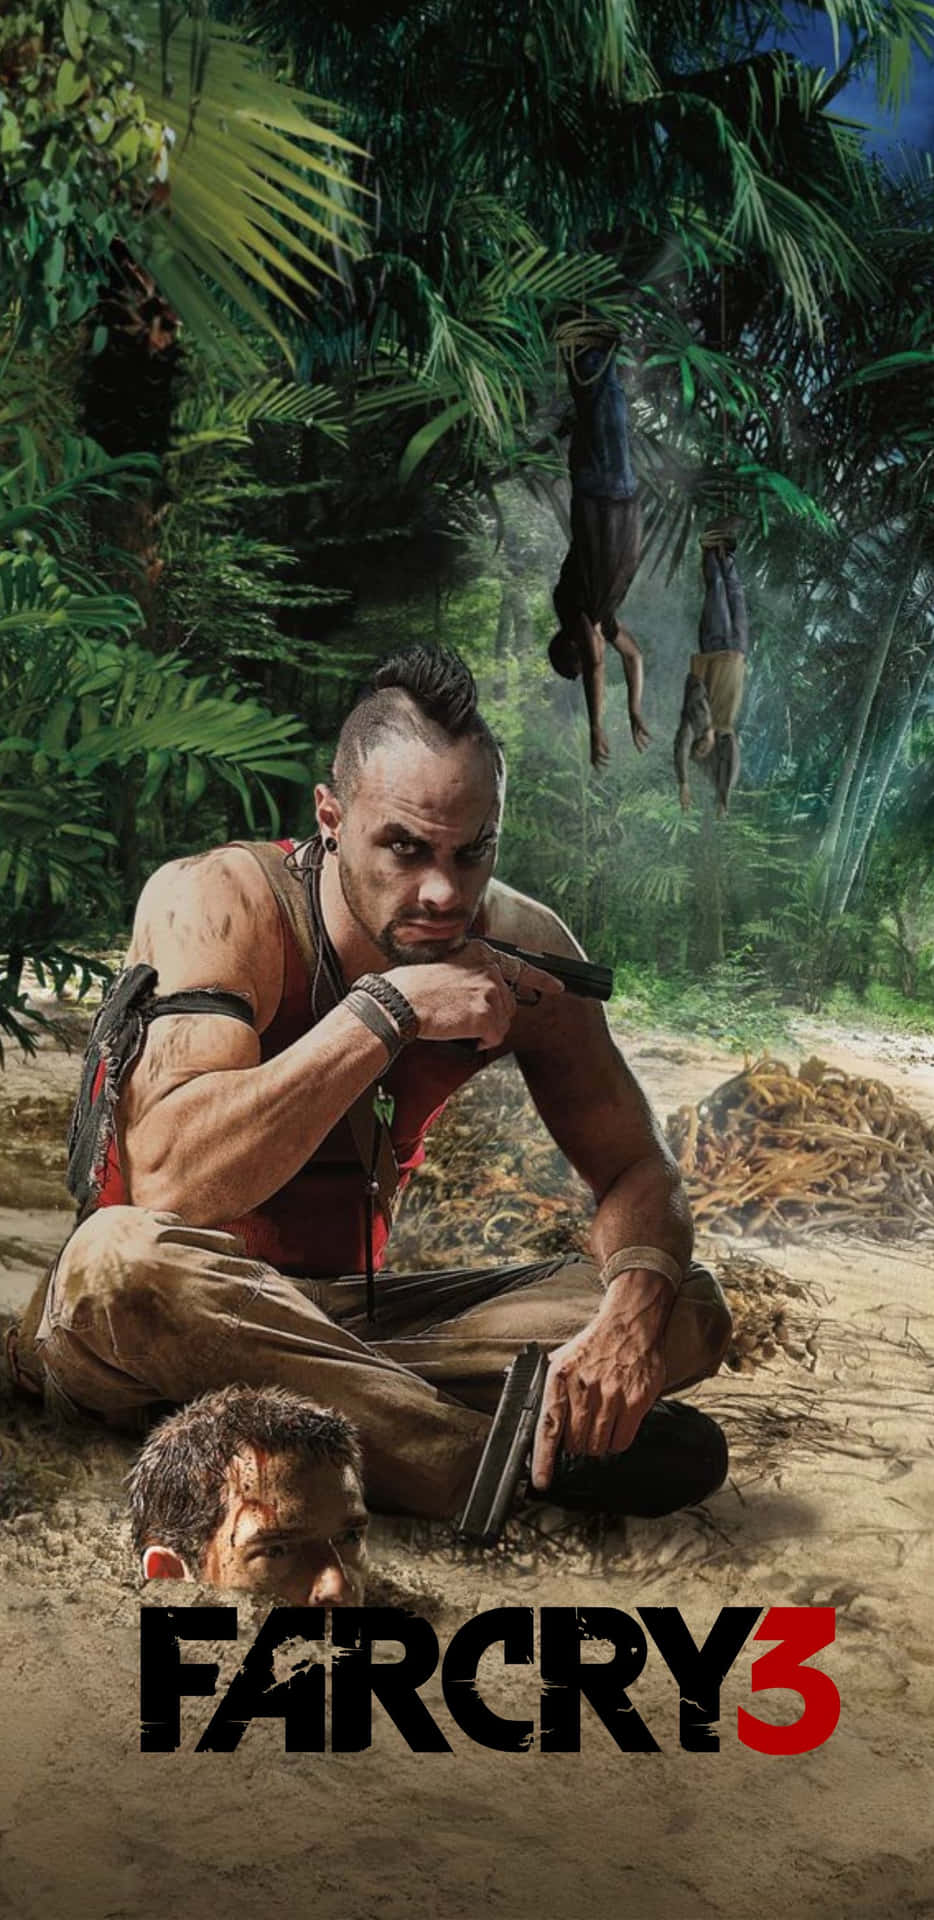 Immerse yourself in the powerful visuals of Far Cry 3 with Pixel 3XL